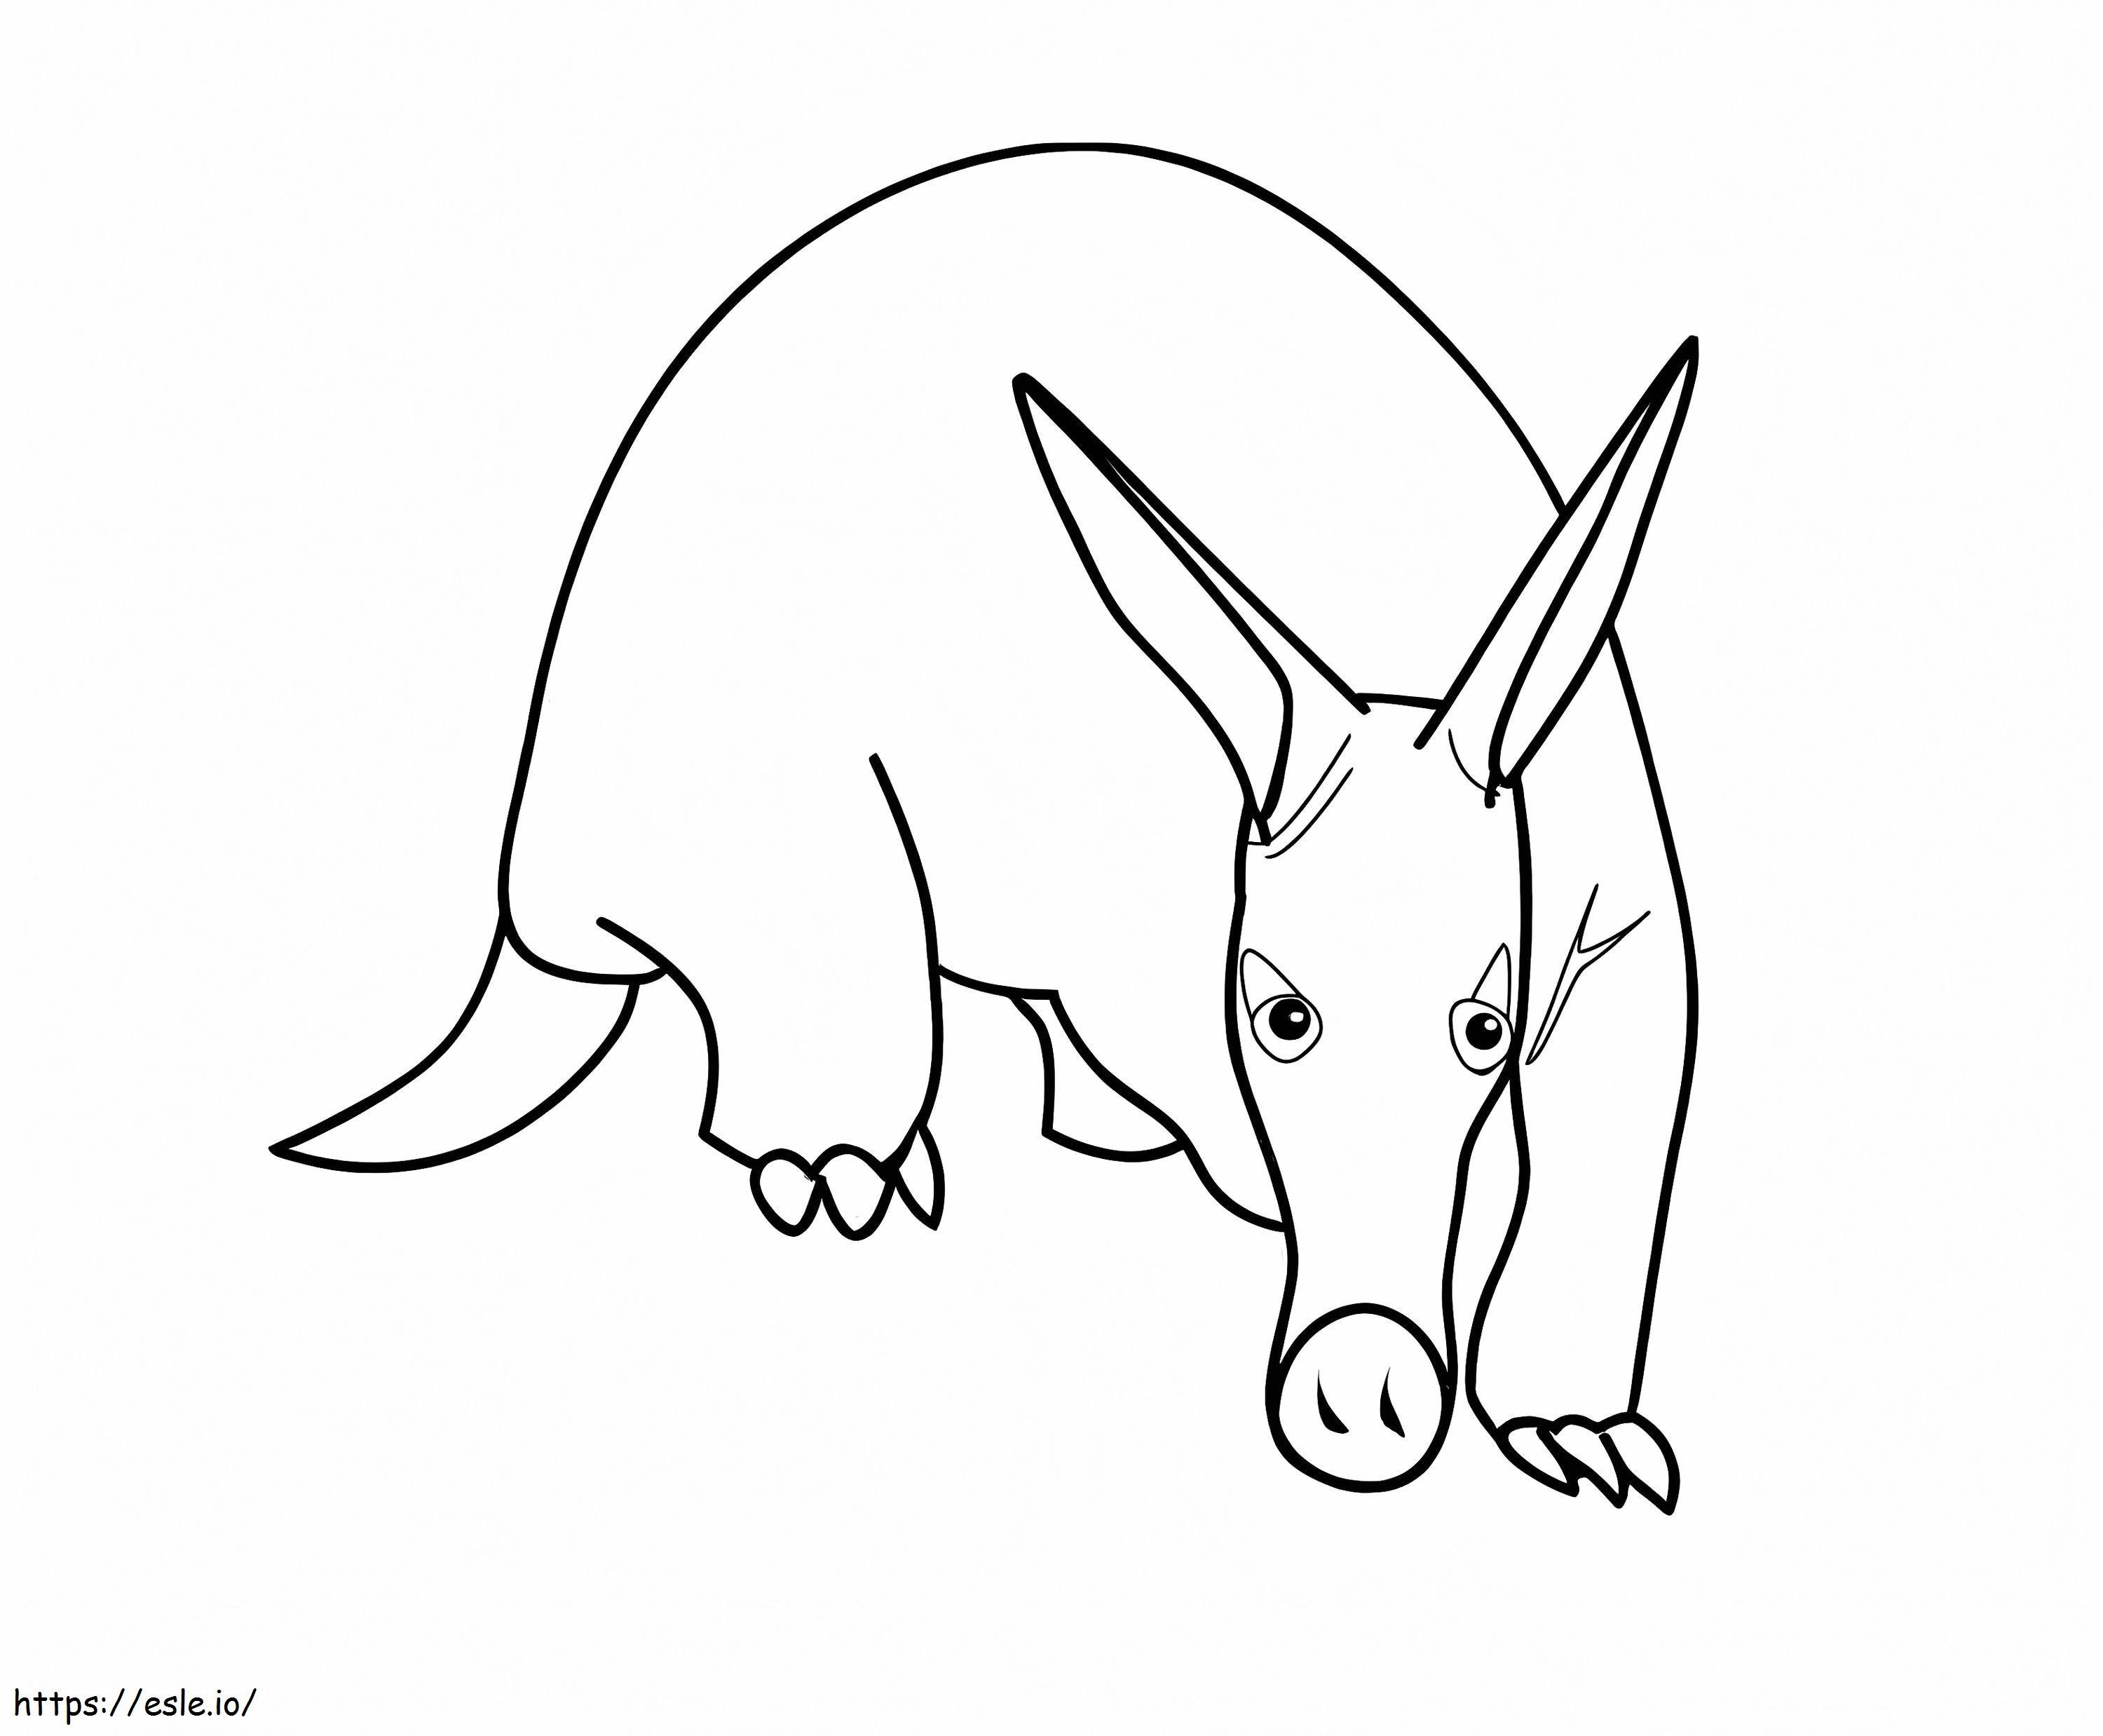 A Funny Anteater coloring page